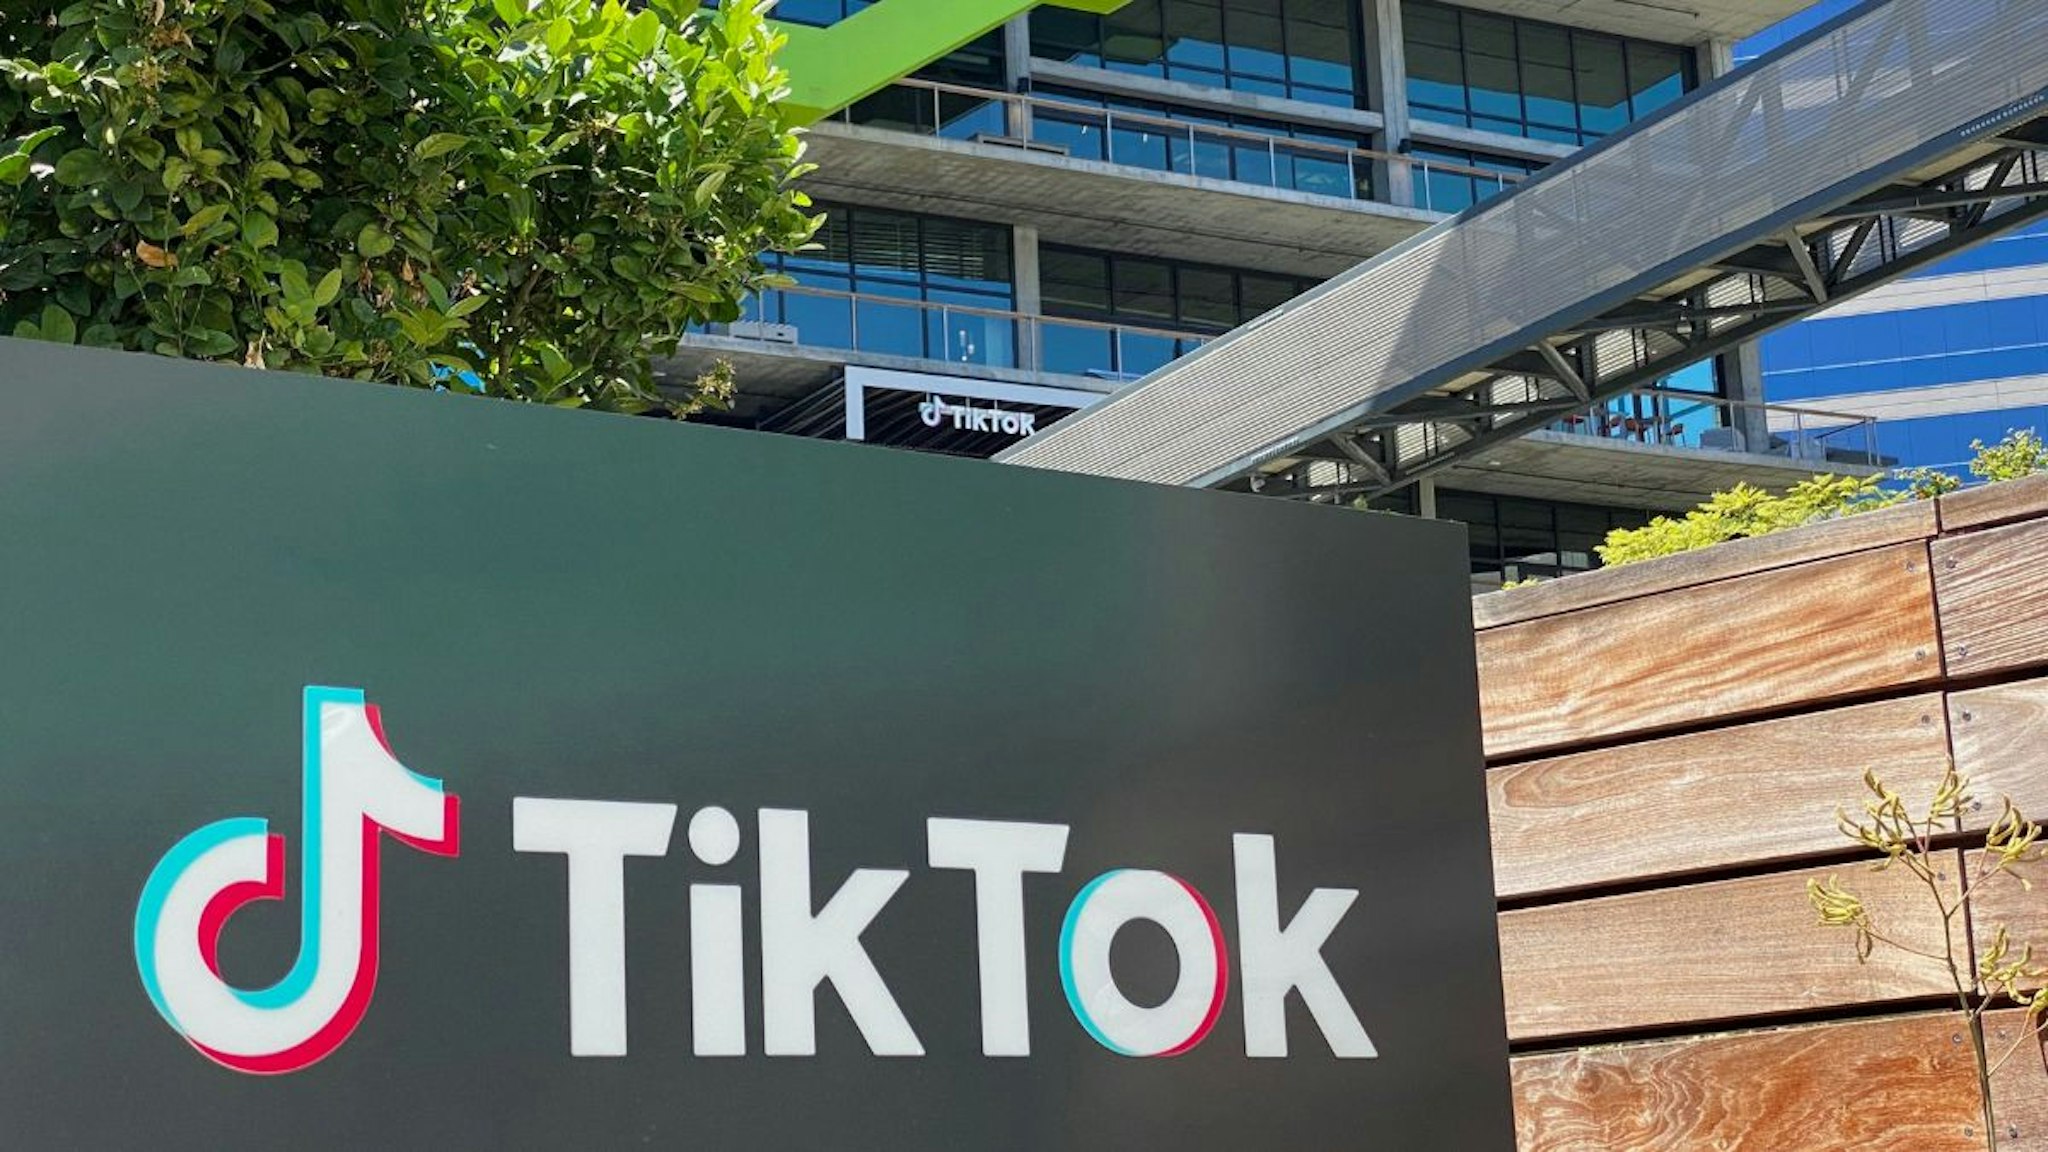 The logo of Chinese video app TikTok is seen on the side of the company's new office space at the C3 campus on August 11, 2020 in Culver City, in the westside of Los Angeles.